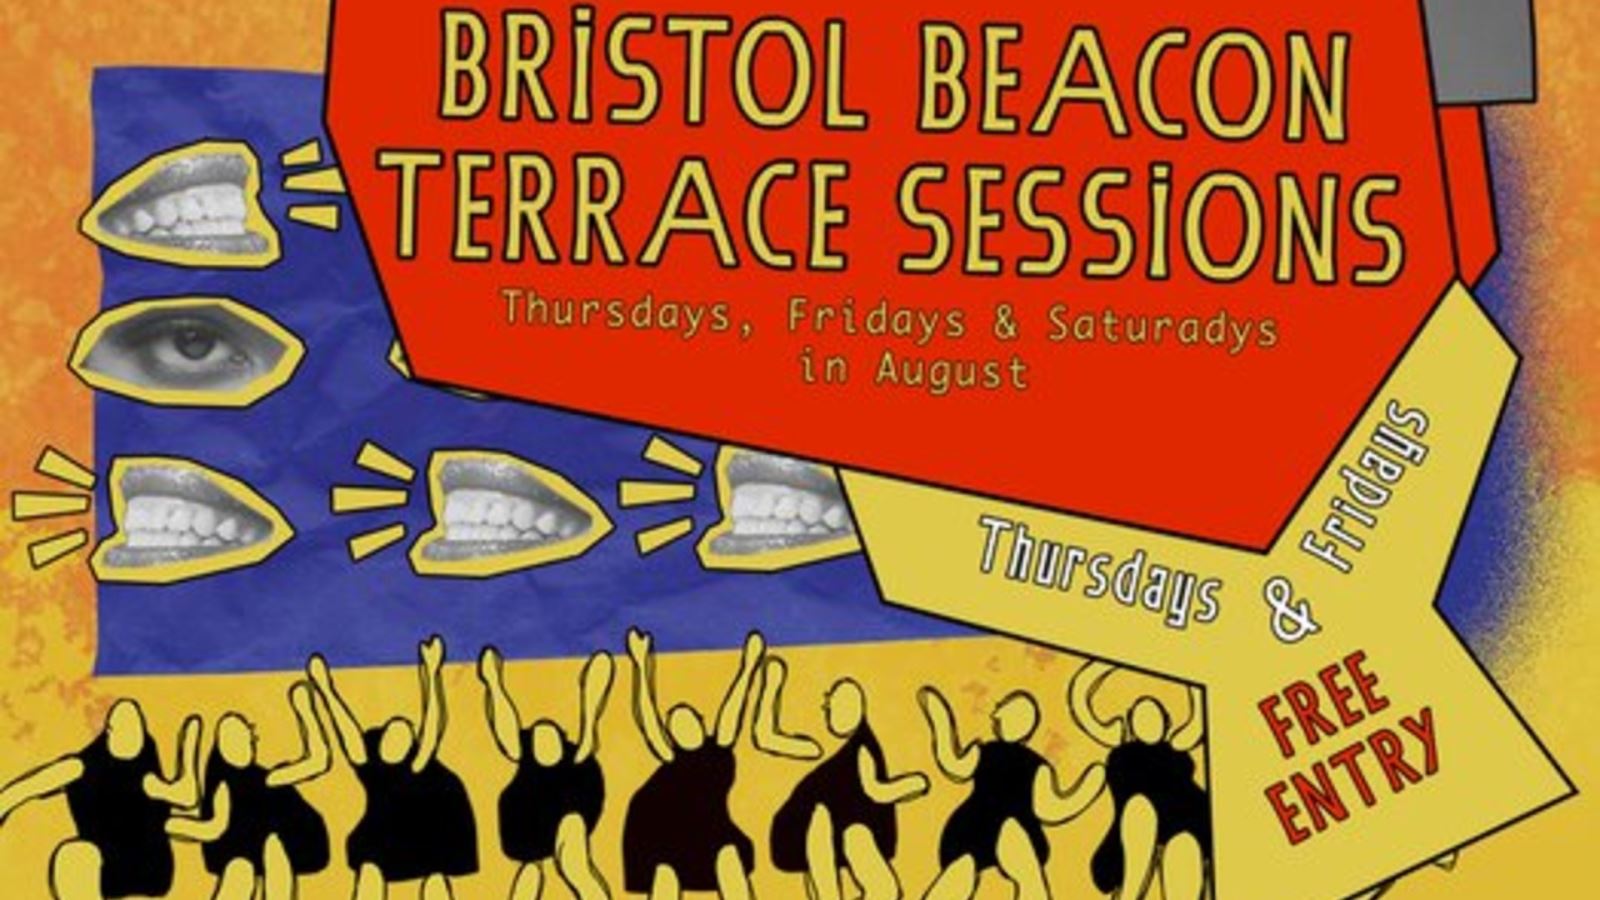 Terrace Sessions at Bristol Beacon